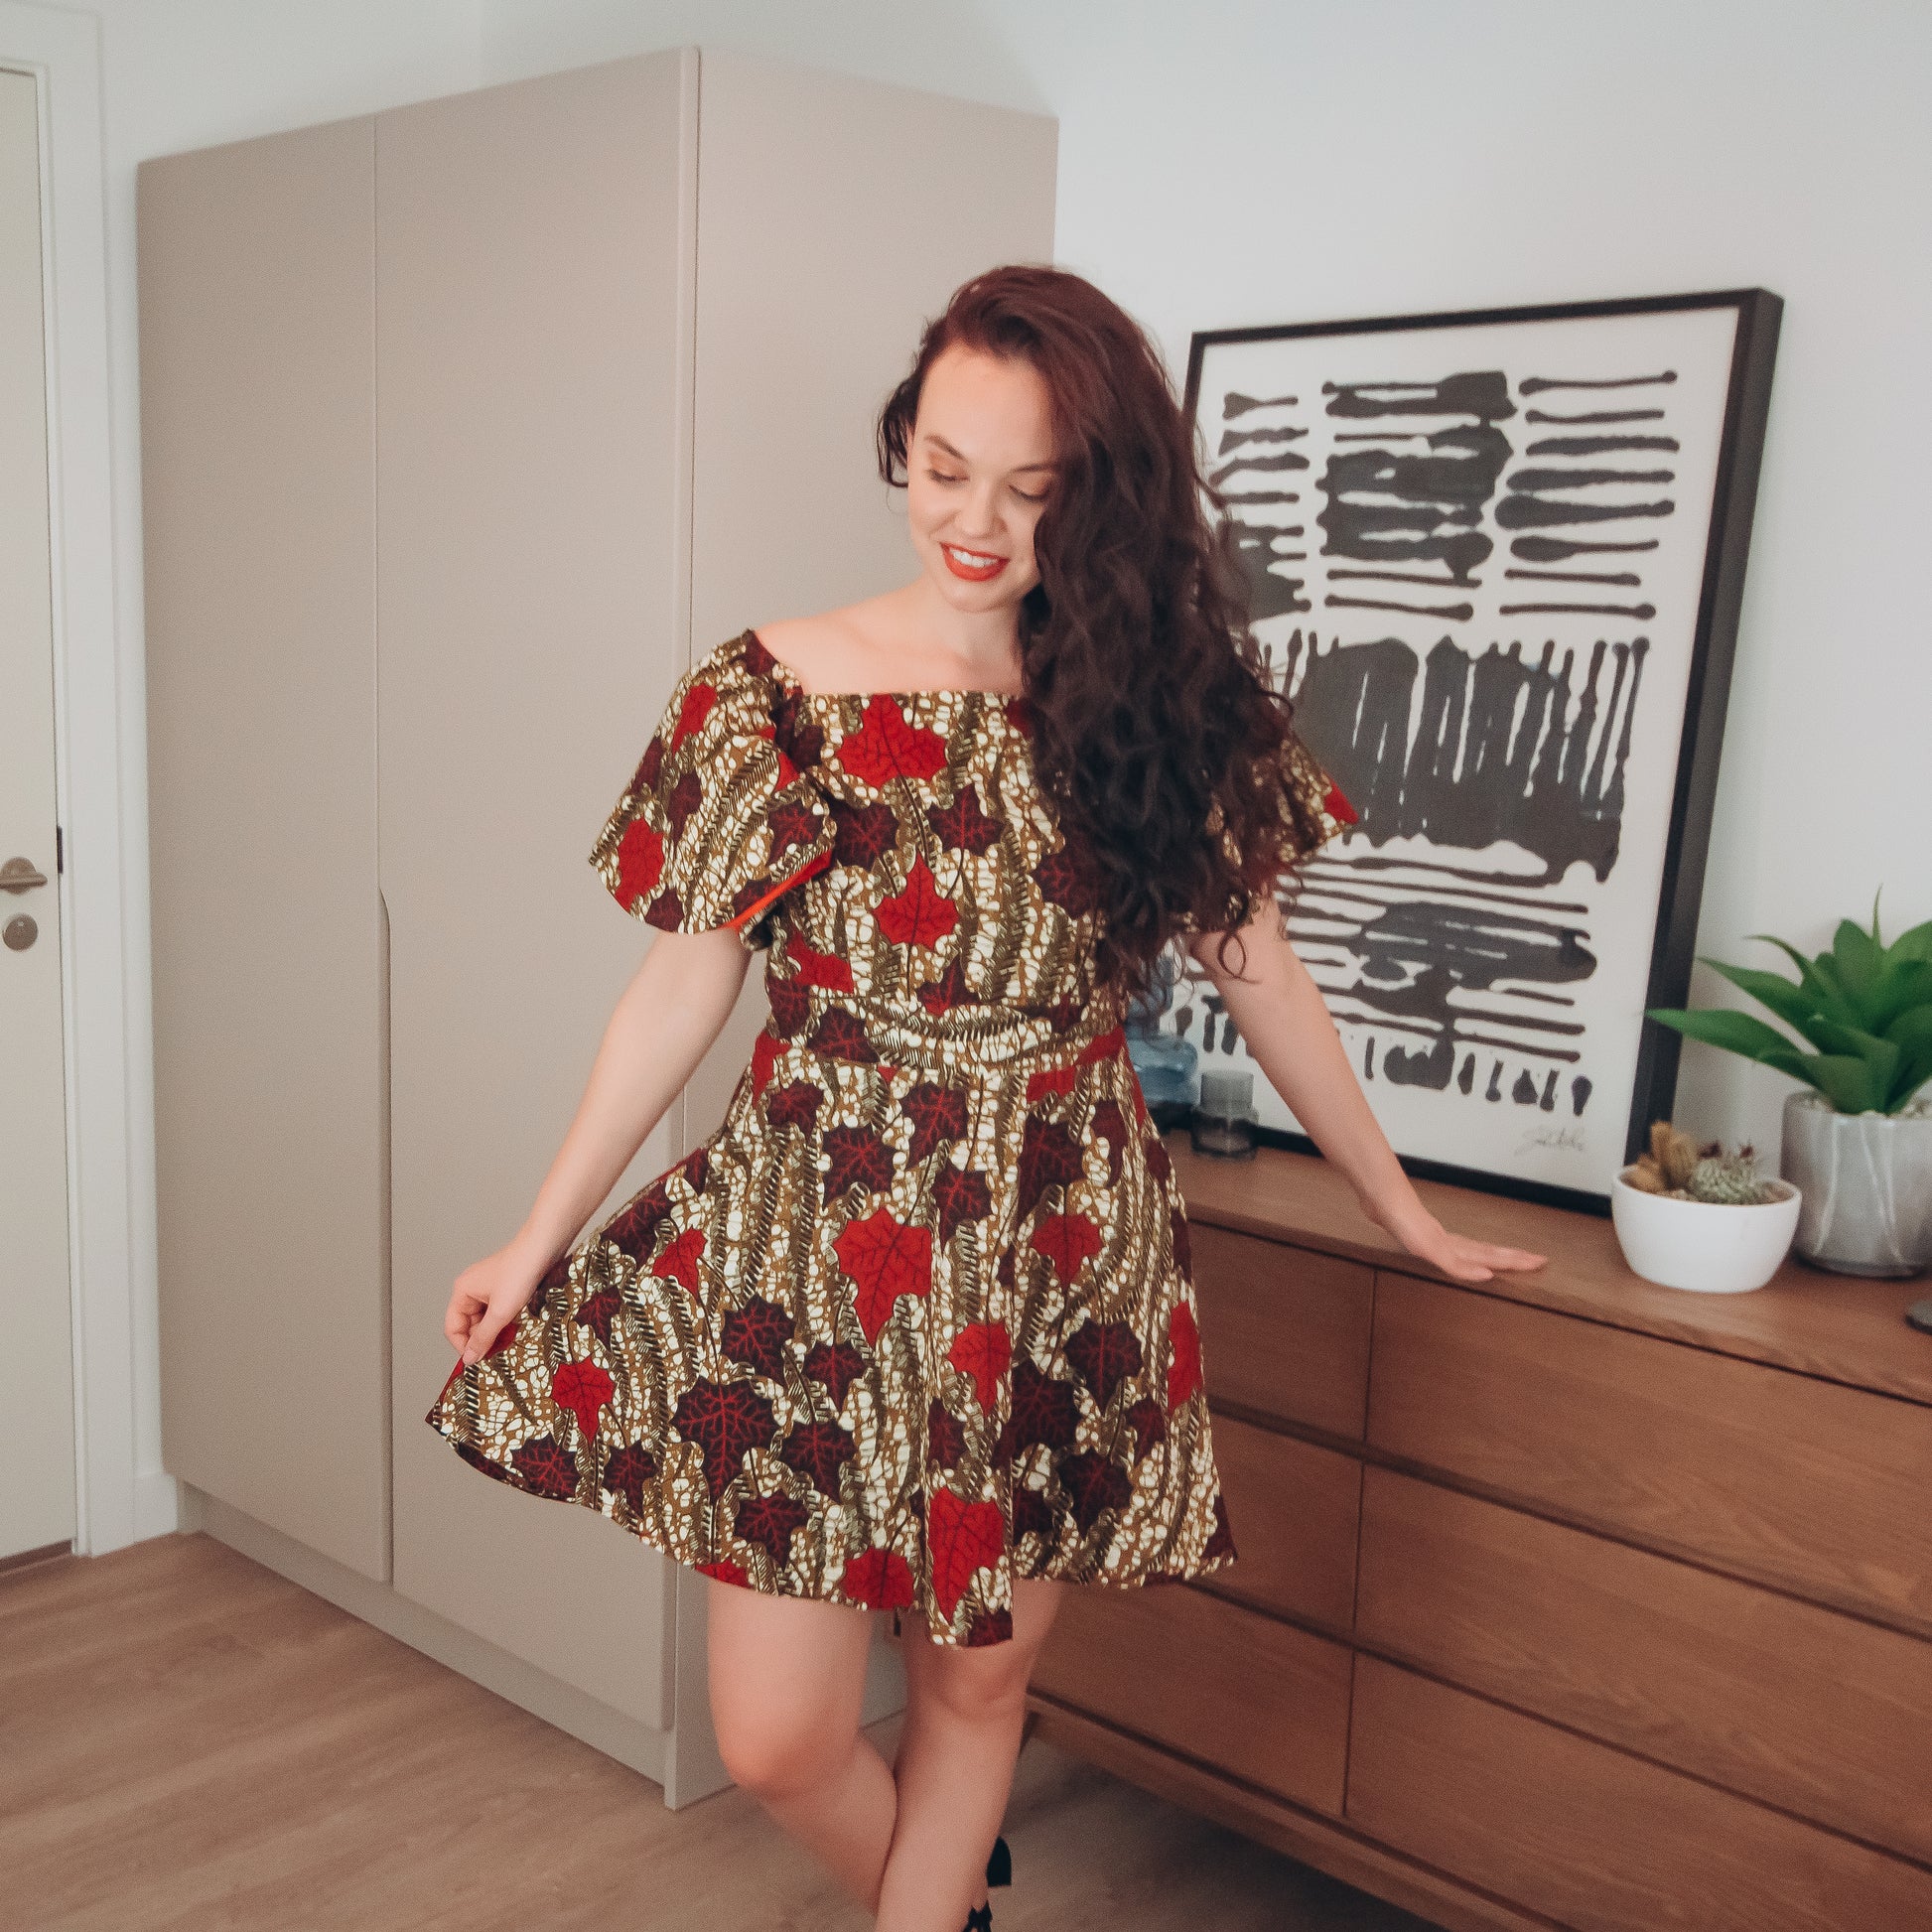  Brown, red, white, and black African Oti  floral textured leaf pattern on Knee length high-low dreads off the shoulder skater dress with slightly flared quarter sleeves, featuring Pockets on each side.